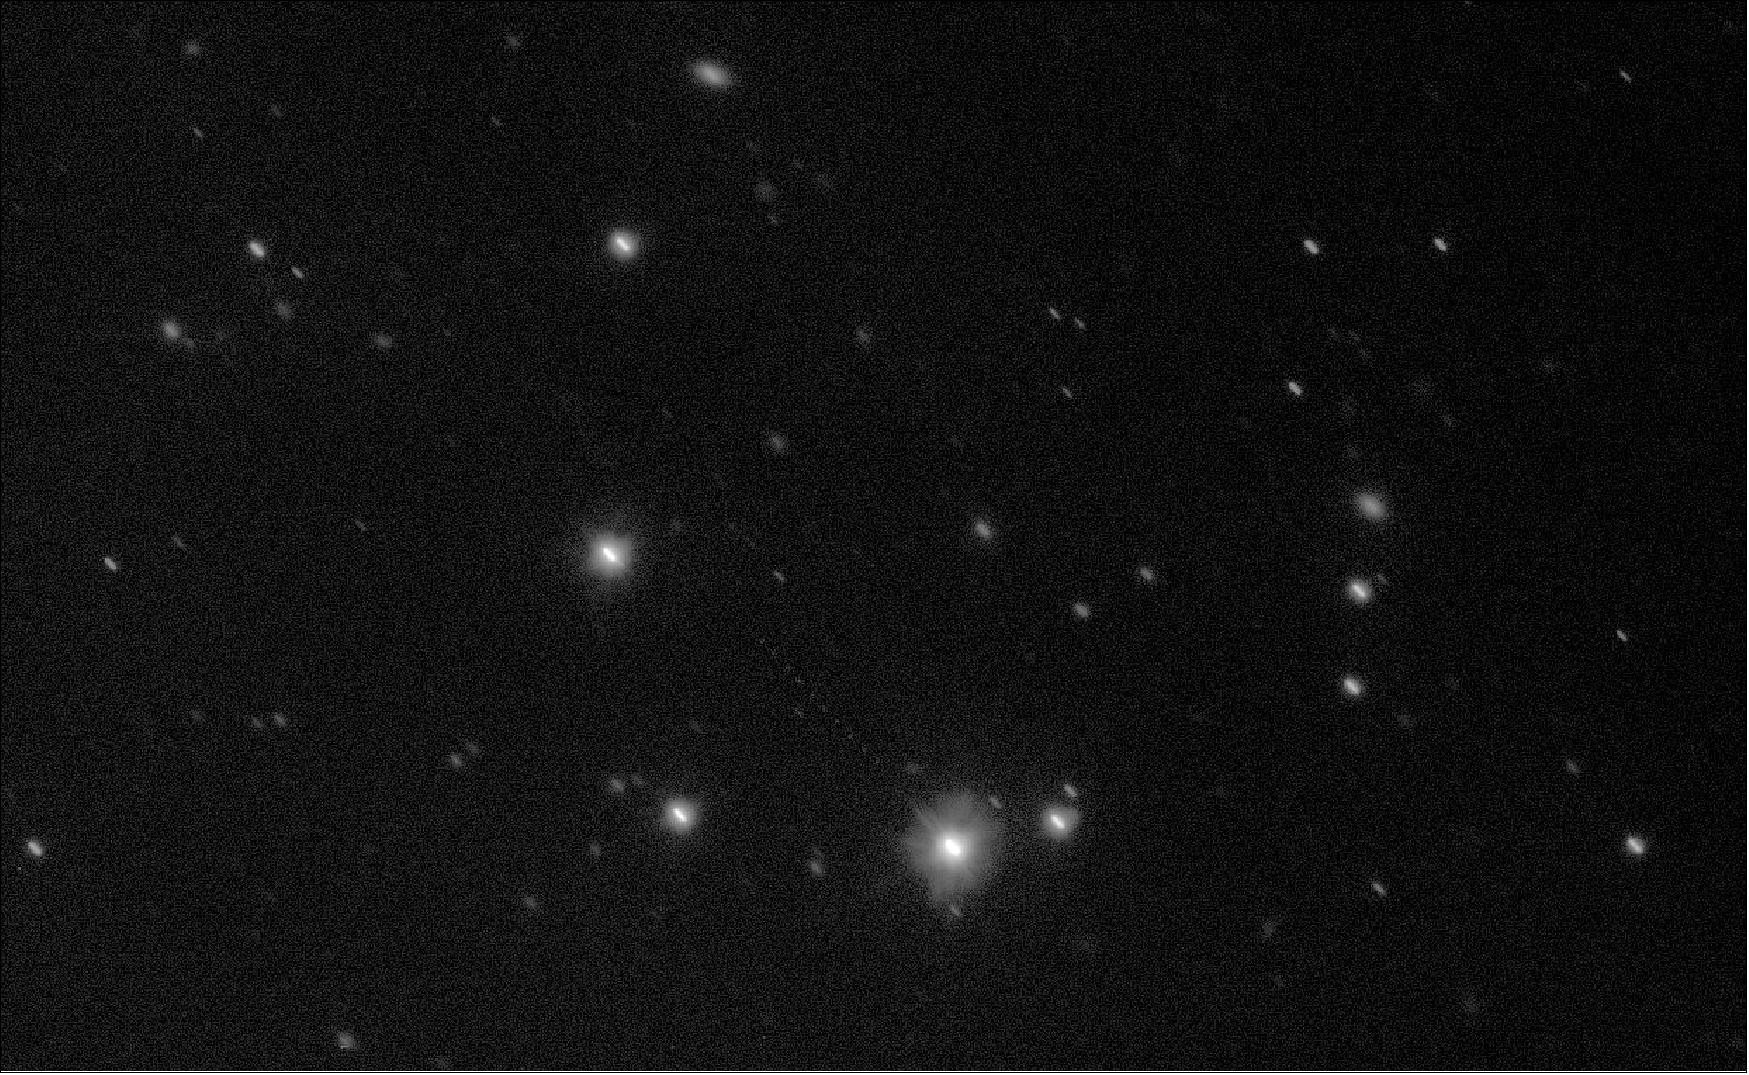 Figure 15: Pinpointing Gaia from Earth. A sequence of images taken as part of the Ground Based Optical Tracking campaign of ESA's Gaia satellite with the European Southern Observatory's (ESO) 2.6 m VLT Survey Telescope (VST) in Chile. This image combines ten observations performed on 14 April 2019: Gaia is visible as a line of ten faint dots just below the image center. The stars in the image appear as slightly elongated, since the telescope is following Gaia rather than the stars. The observations have been stacked using the stars as reference to show the movement of Gaia across the sky. The images were obtained using the OMEGACAM instrument with the SDSS-r filter on the VST, with an exposure time of 60 seconds for each individual observation; the whole sequence covers about 17 minutes. Astrometric determination of Gaia's position is conducted on each frame, using as reference the coordinates of the background stars as provided in the second Gaia data release. The results are then averaged and the resulting value for the position of Gaia has a precision of 20 mas (milliarcseconds) or better (one arcsecond is equivalent to the size of a Euro coin seen from a distance of about 4 km), image credit: ESO; CC BY 4.0